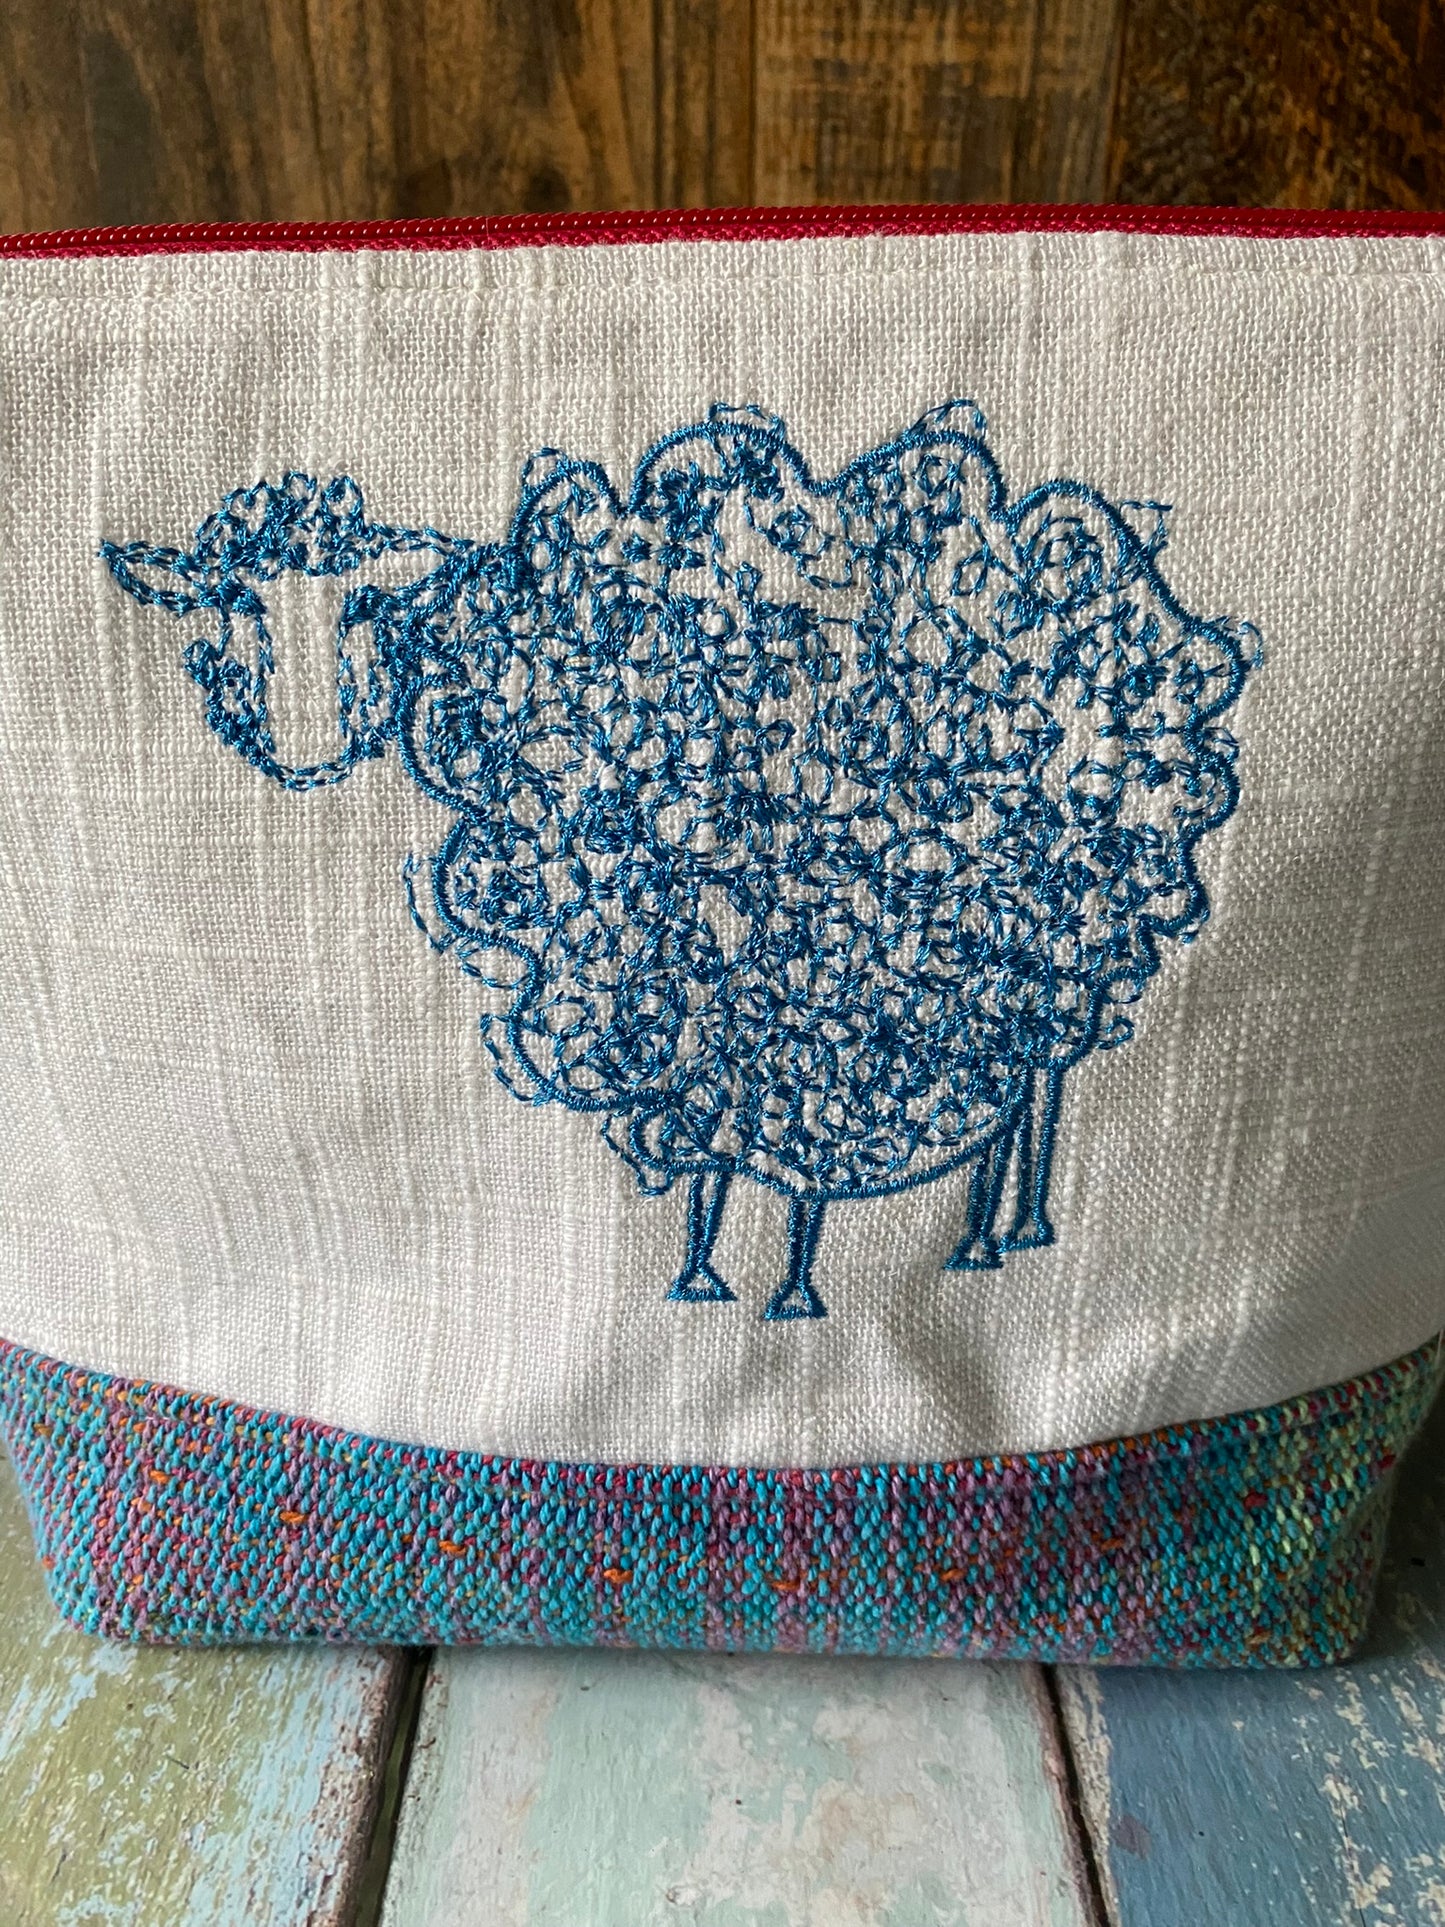 Blue Sheep Project or Cosmetic Zipper Bag